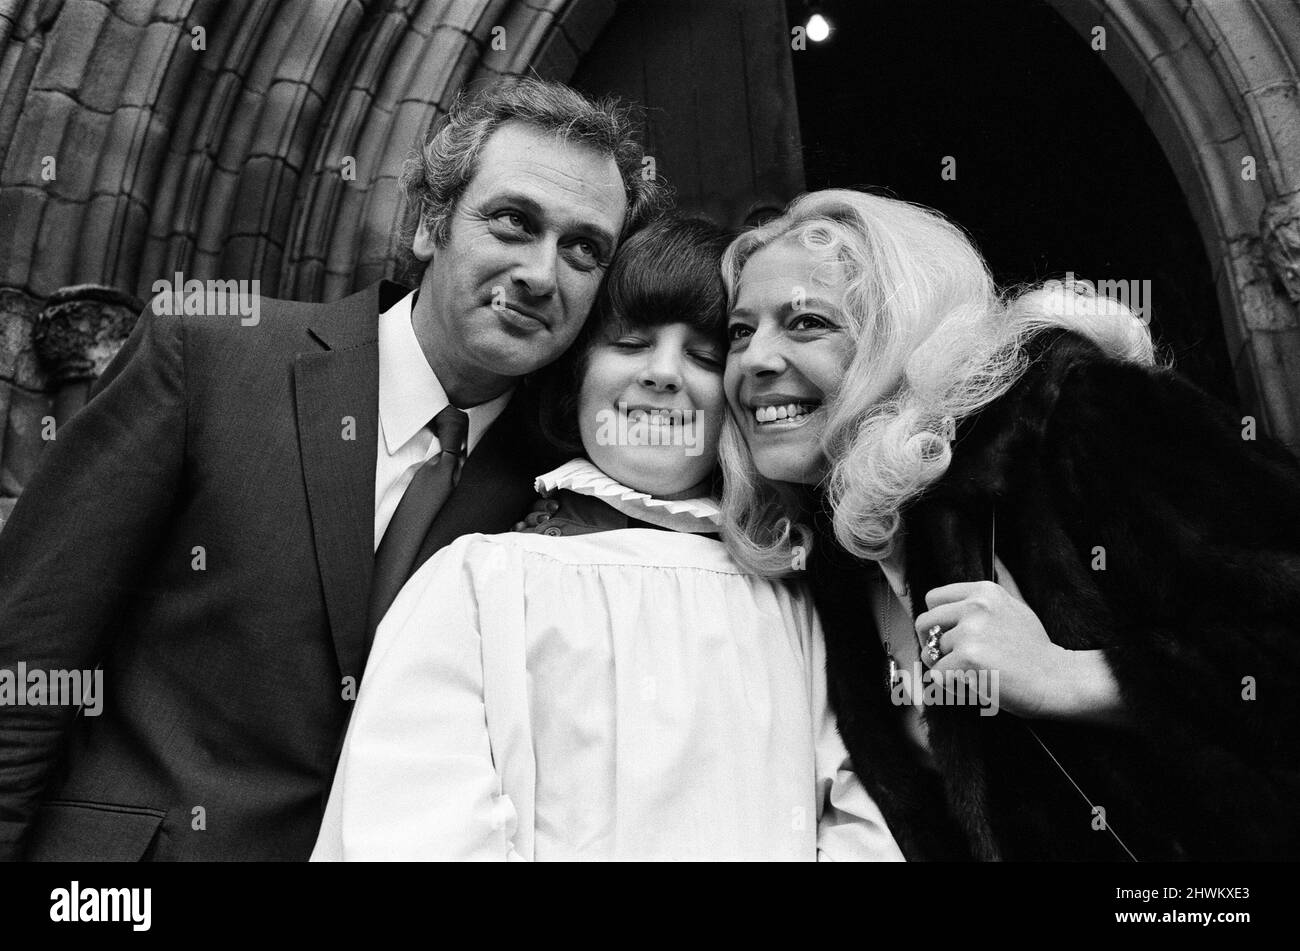 Granada TV star Julie Goodyear, 30, who plays the barmaid in the Rovers Return in 'Coronation Street' is pictured with her husband-to-be Tony Rudman, 42, and her son from a previous marriage, Gary Goodyear, 12. Gary is a choirboy at Bury Parish Church where they will wed. 18th February 1973. Stock Photo